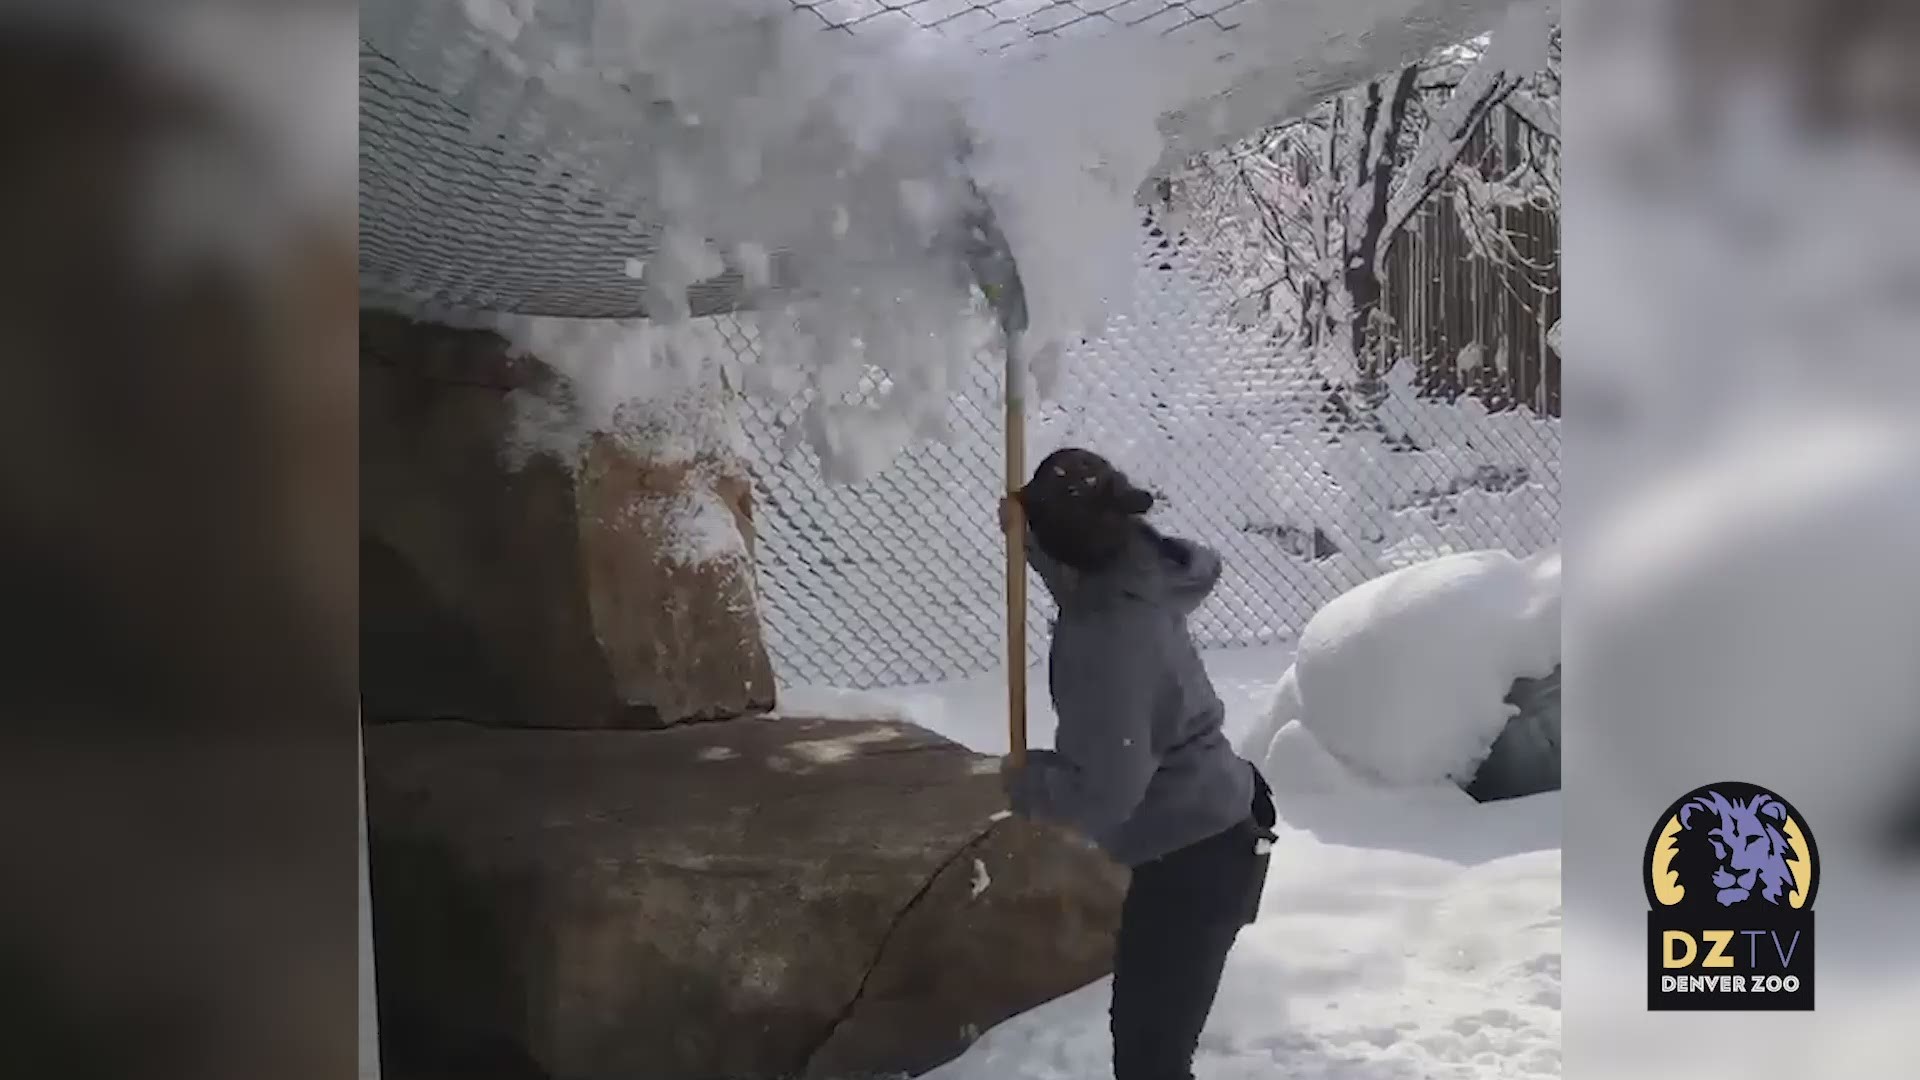 The lions at the Denver Zoo aren't used to snow, but they were pretty excited about it! (Video courtesy the Denver Zoo)